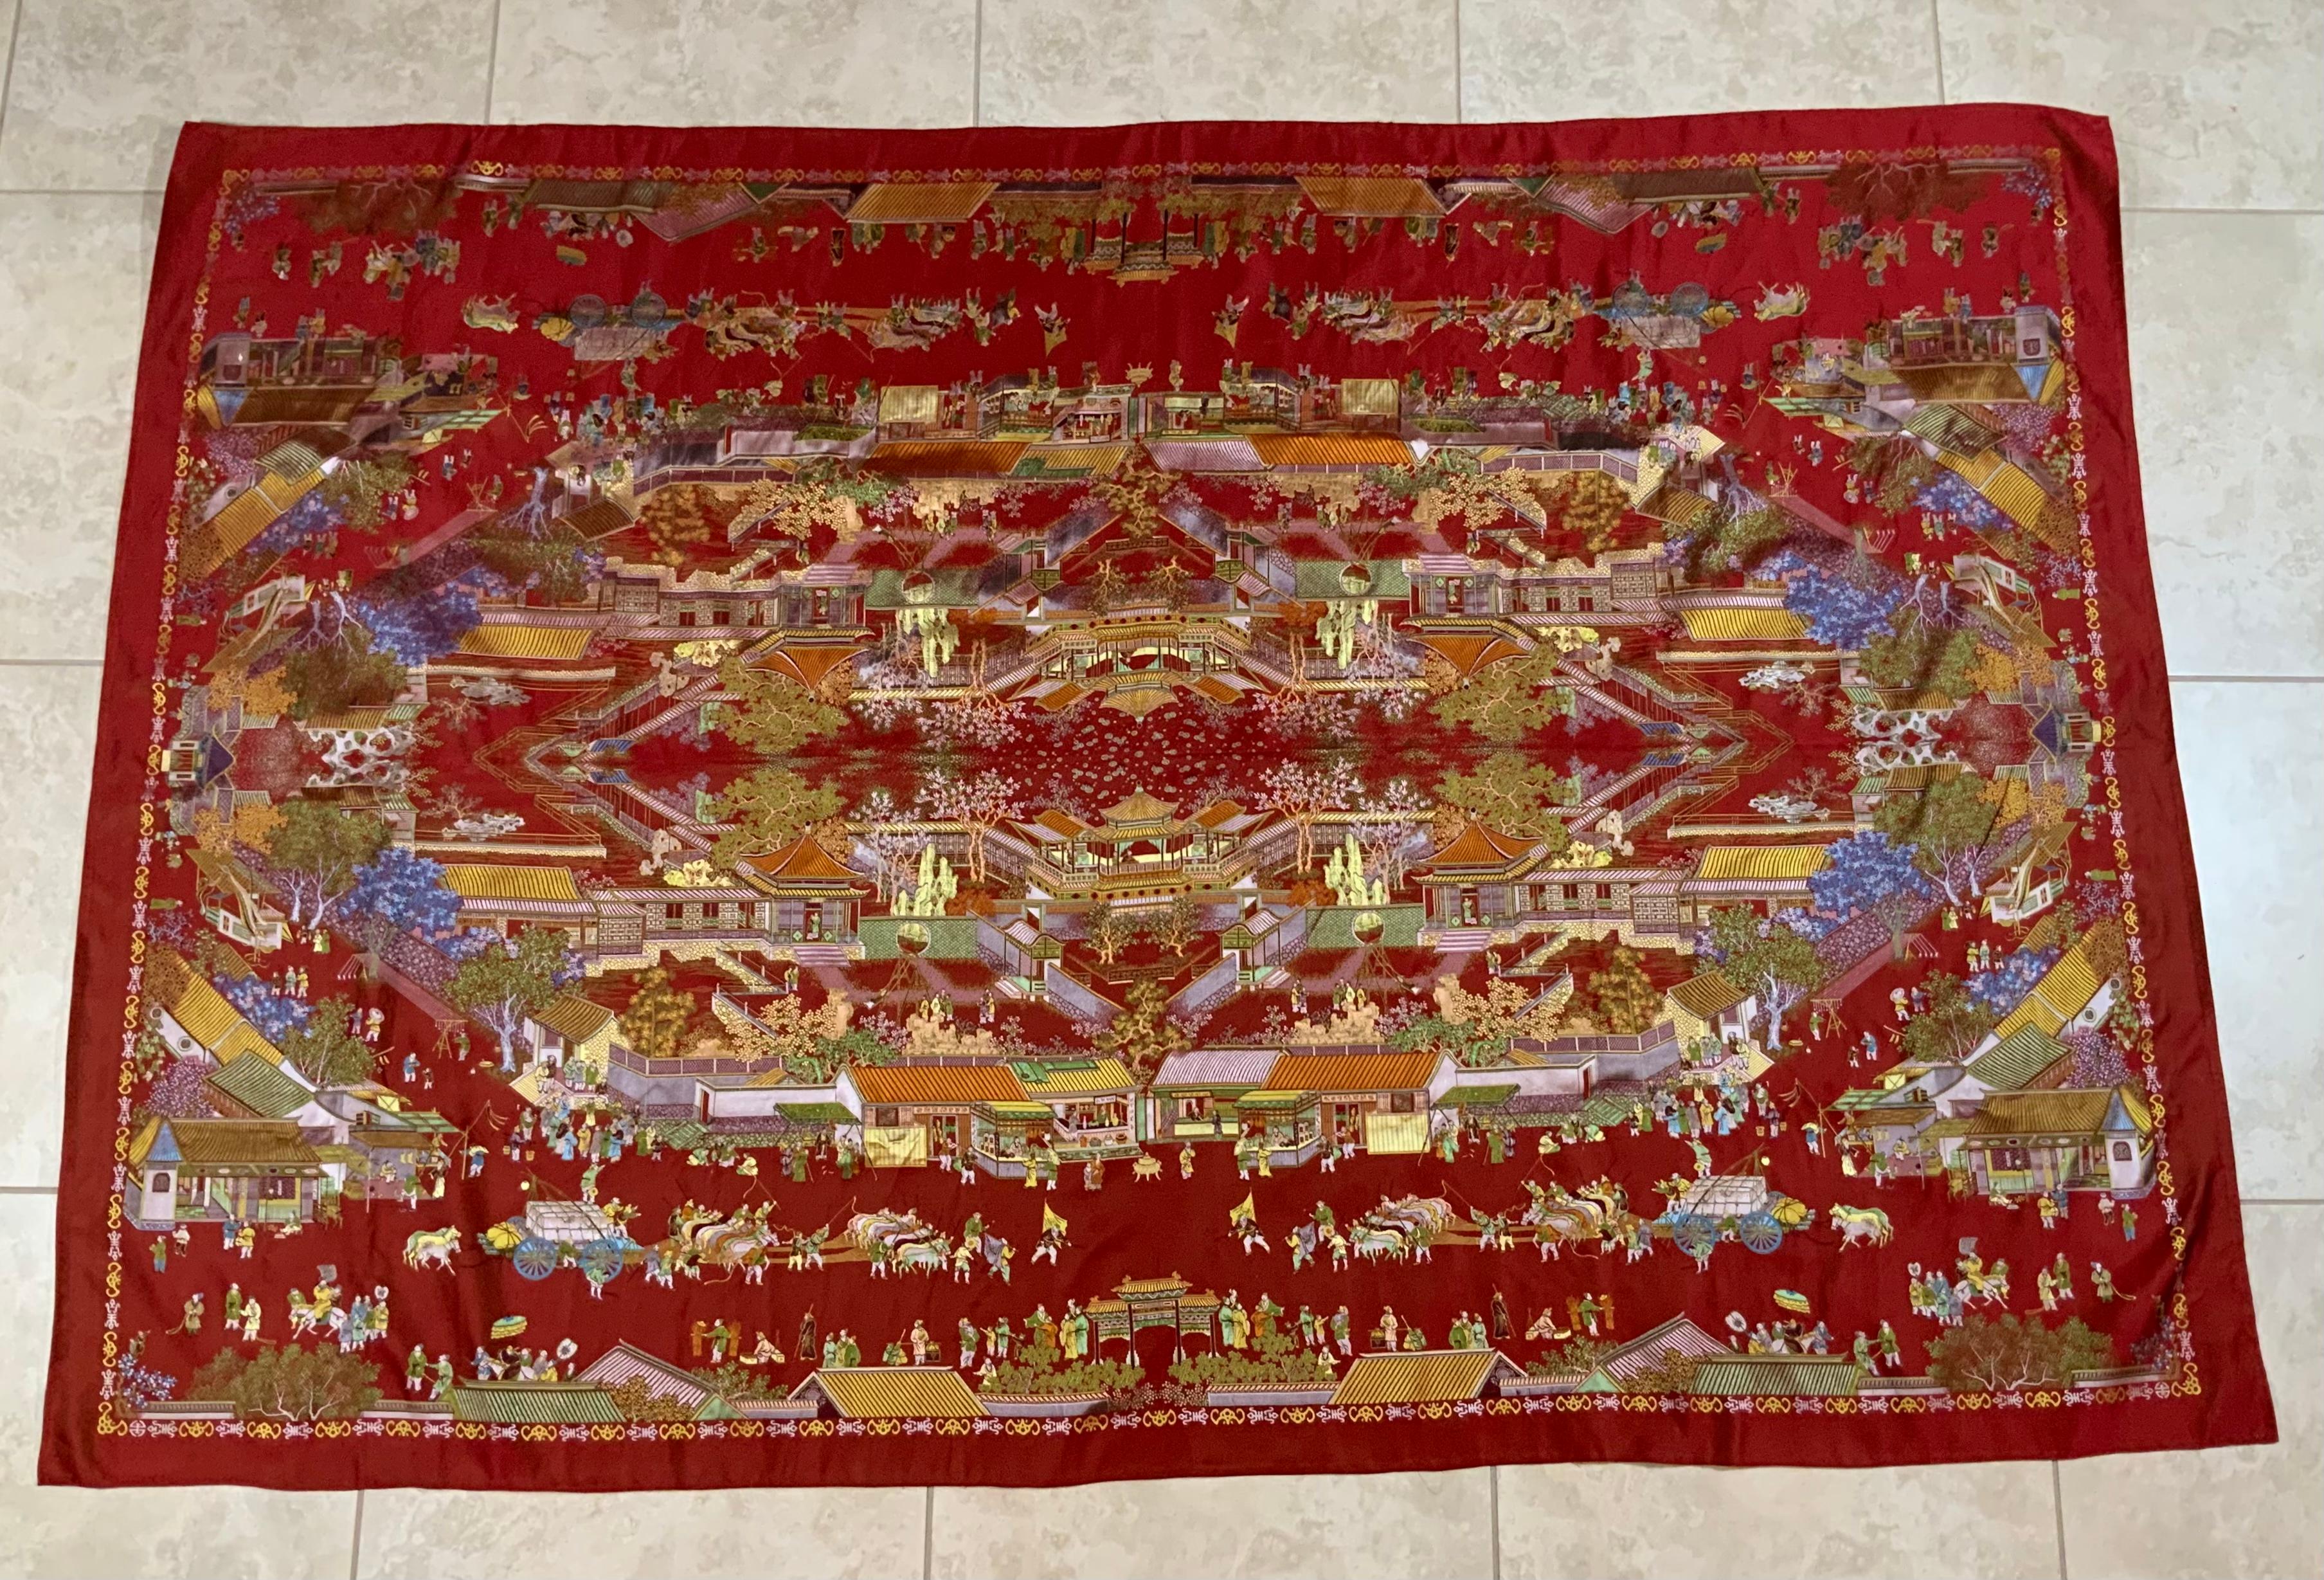 Exceptional Chinese textile depicting classic Chinese scenery of flowers, garden , pagoda, playground ,market and people. All in vivid and beautiful colors on a vibrant red background.
sturdy, could use as wall hanging or over a couch, great